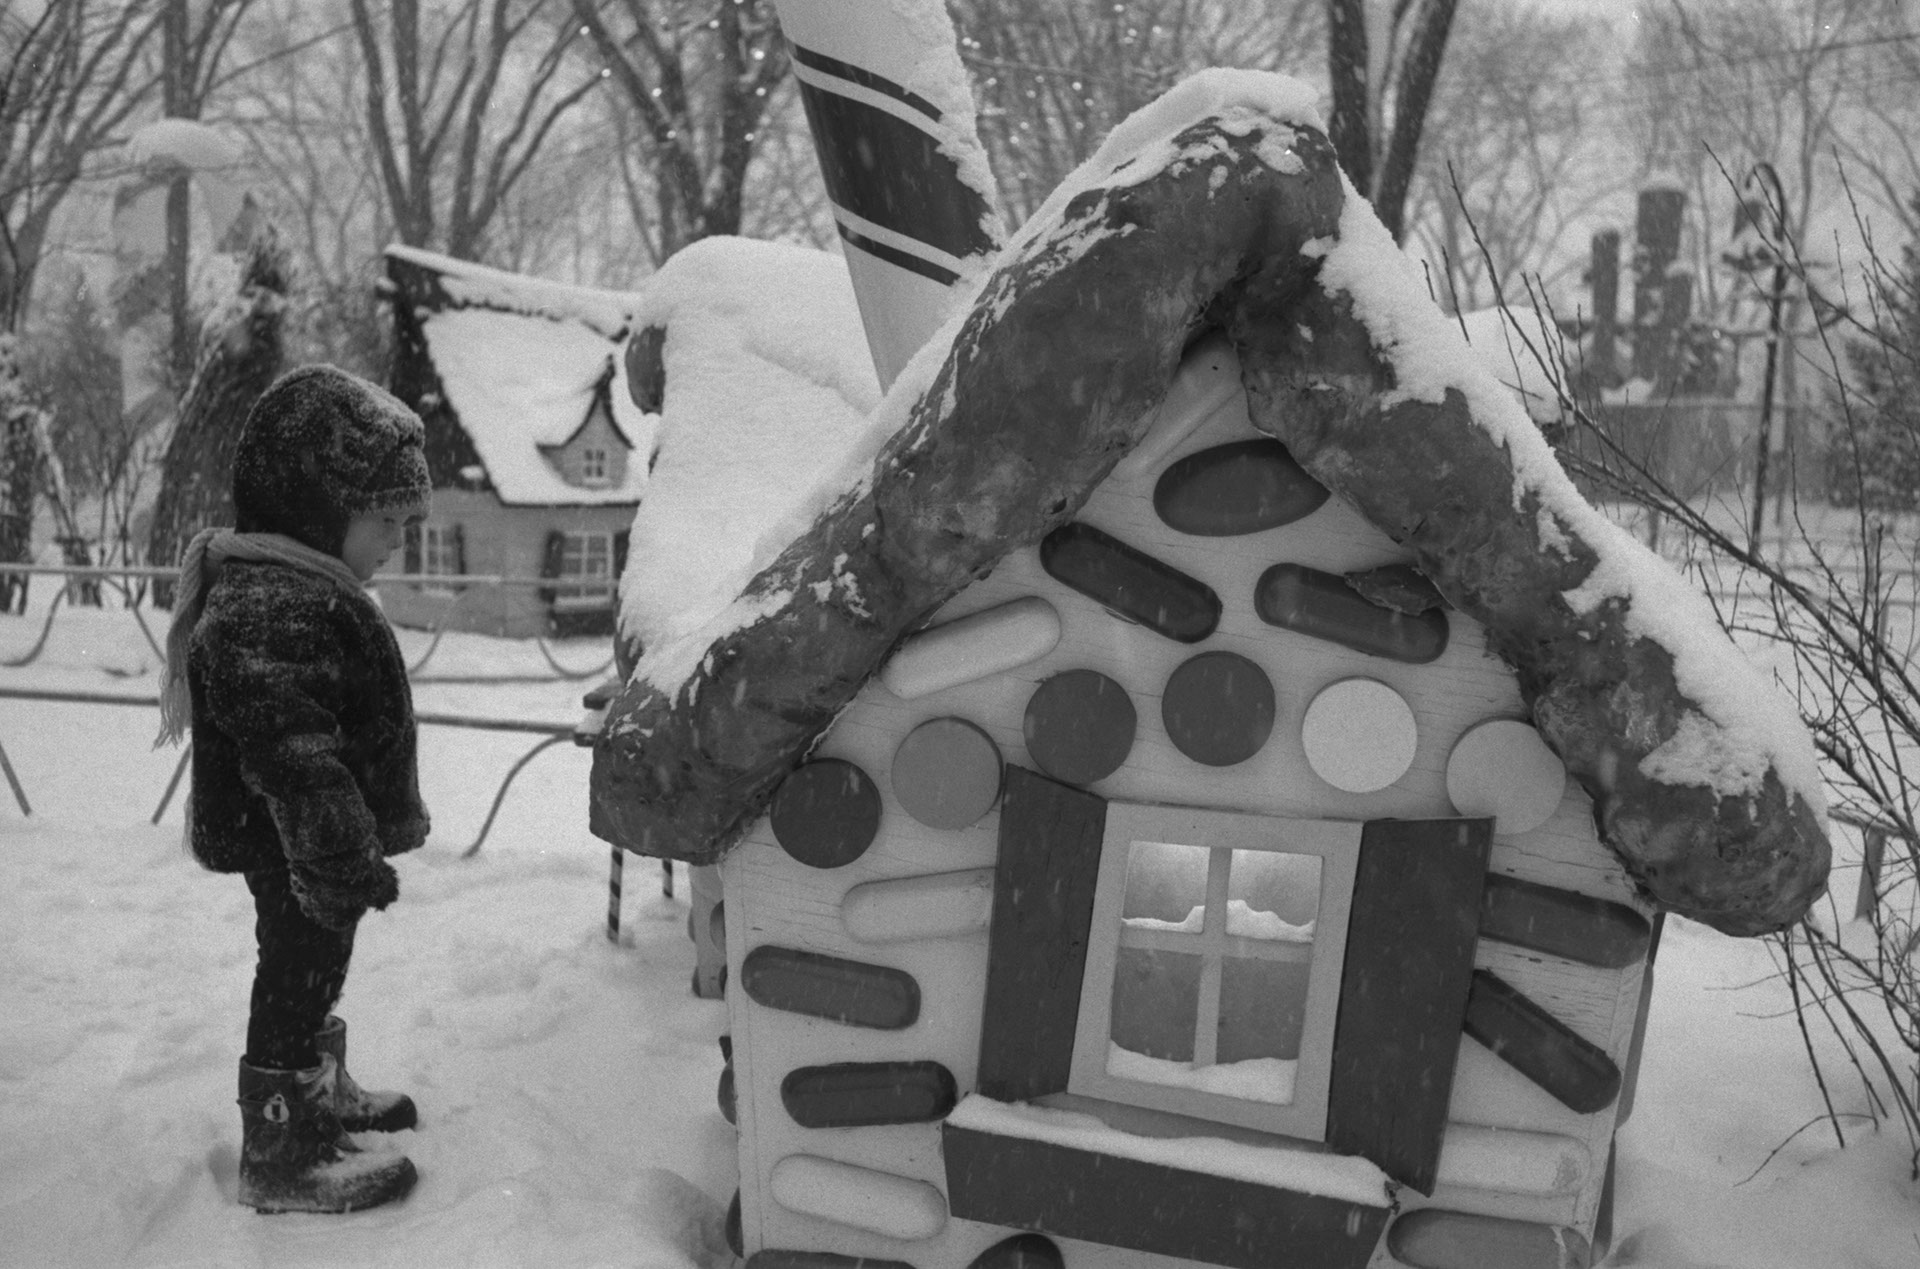 Small child in winter clothing looking at a candy-cane cottage